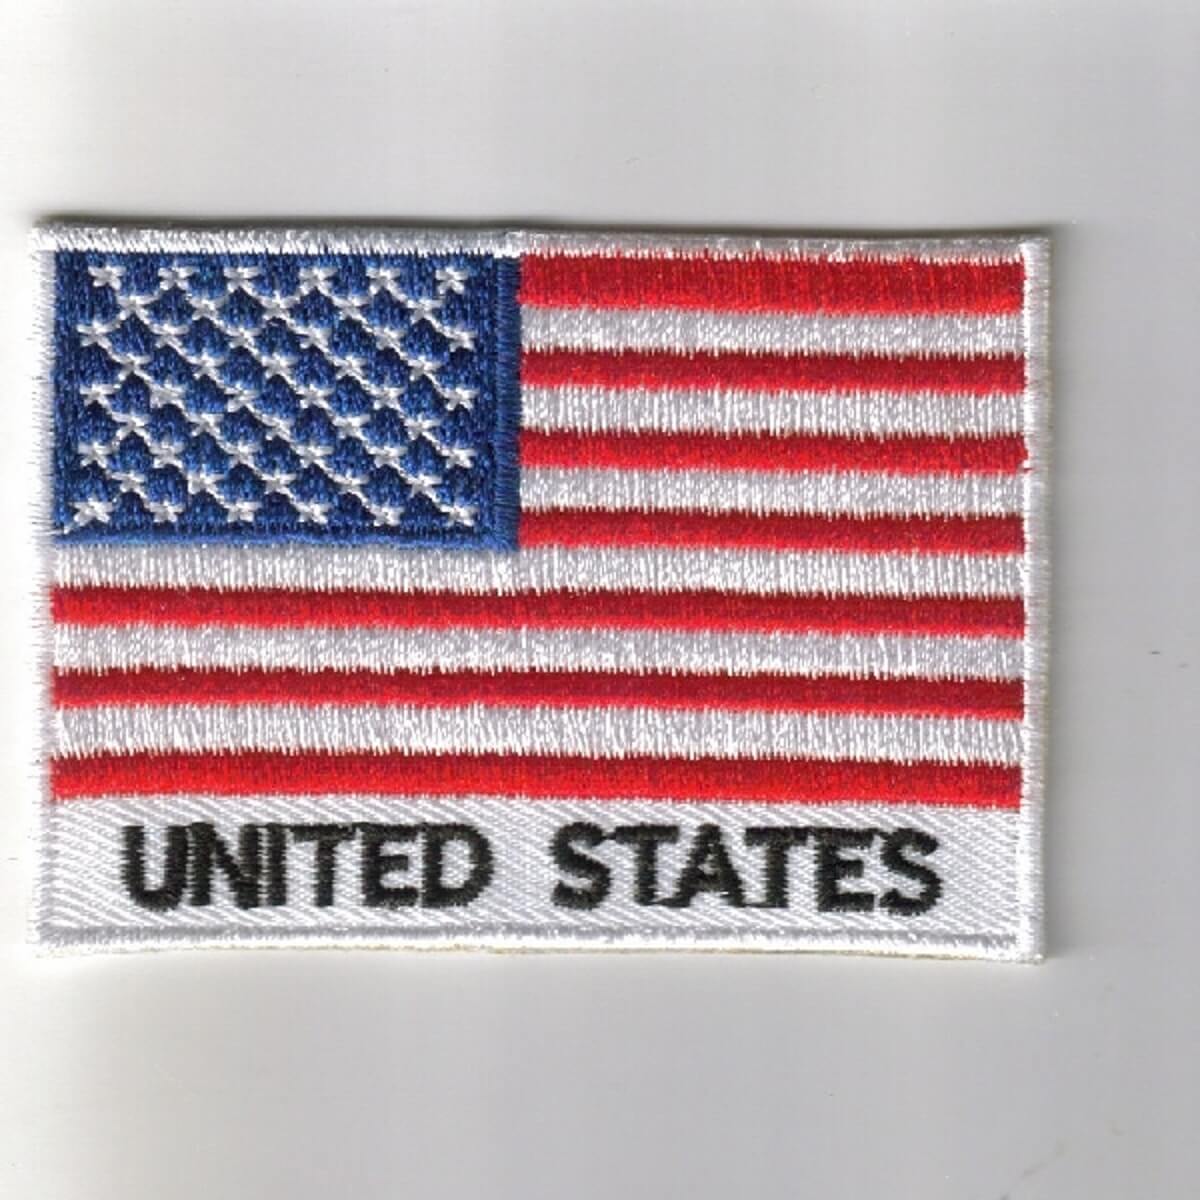 United States US State Name Patches Embroidered Iron-on Applique